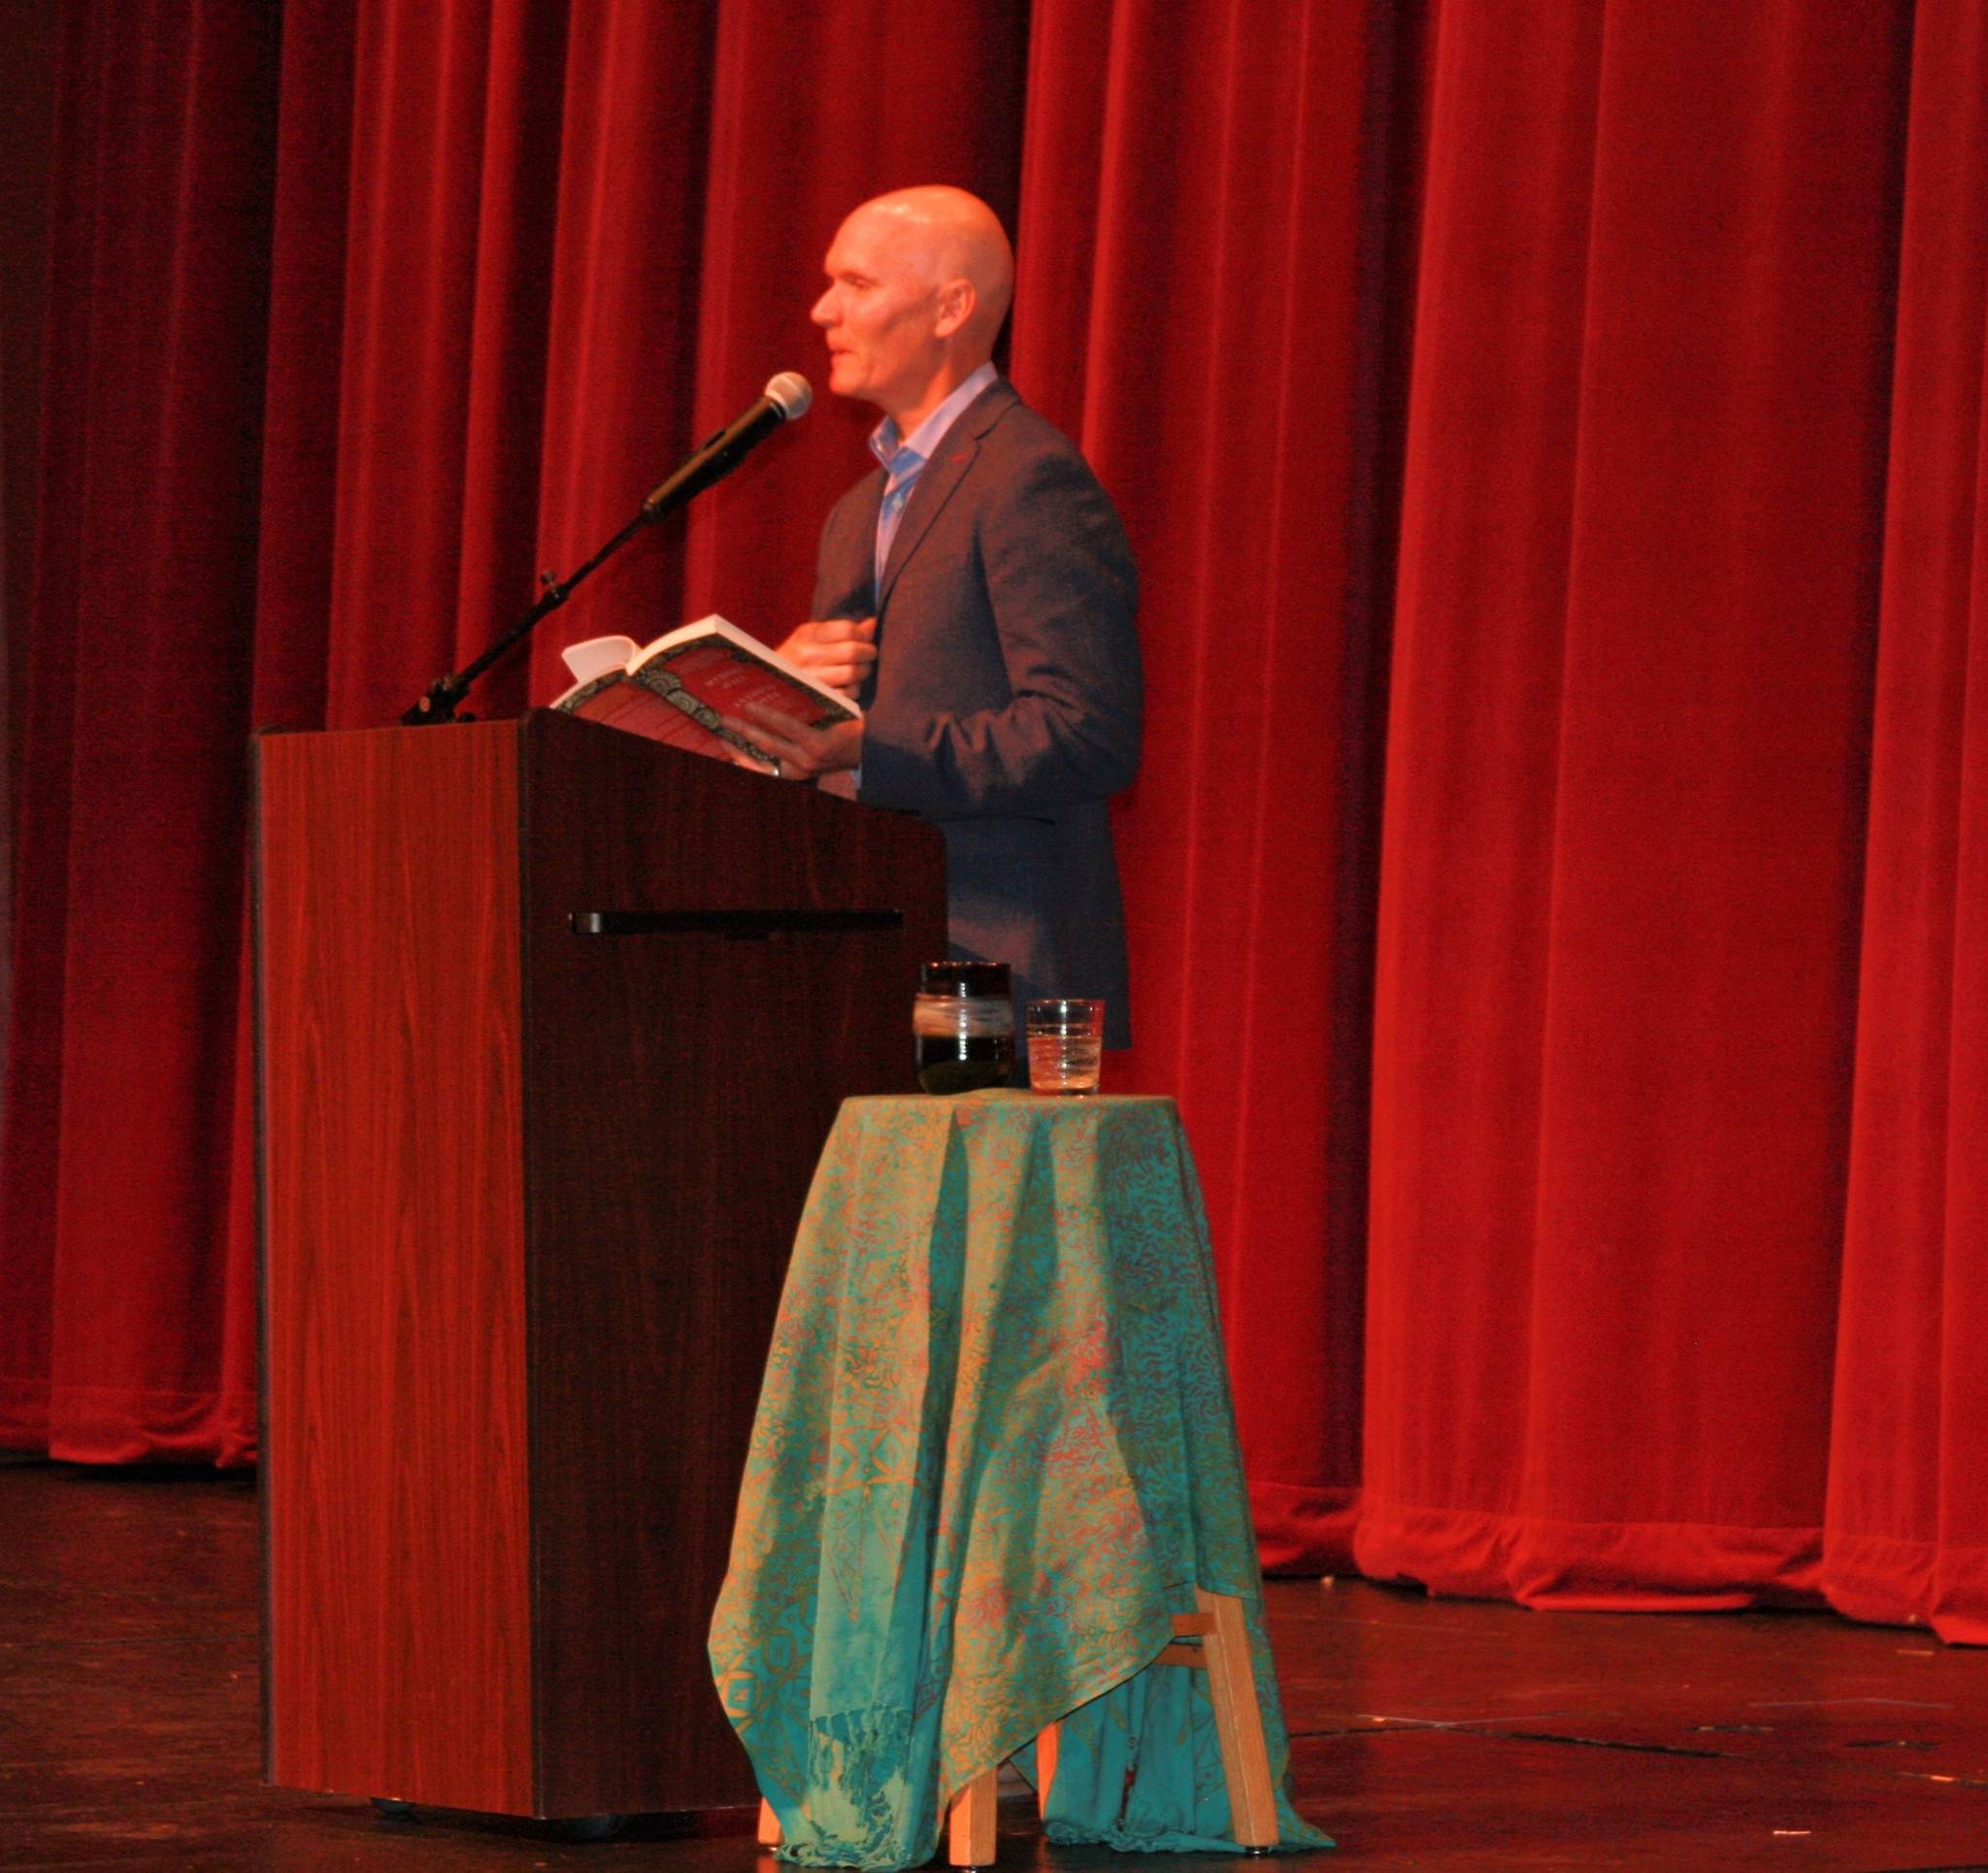 Kachemak Bay Writers’ Conference keynote speaker Anthony Doerr gives a public reading of his short story, “The Deep,” on Saturday, June 9, 2018 at the Homer High School Mariner Theatre in Homer, Alaska. (Photo by Delcenia Cosman)